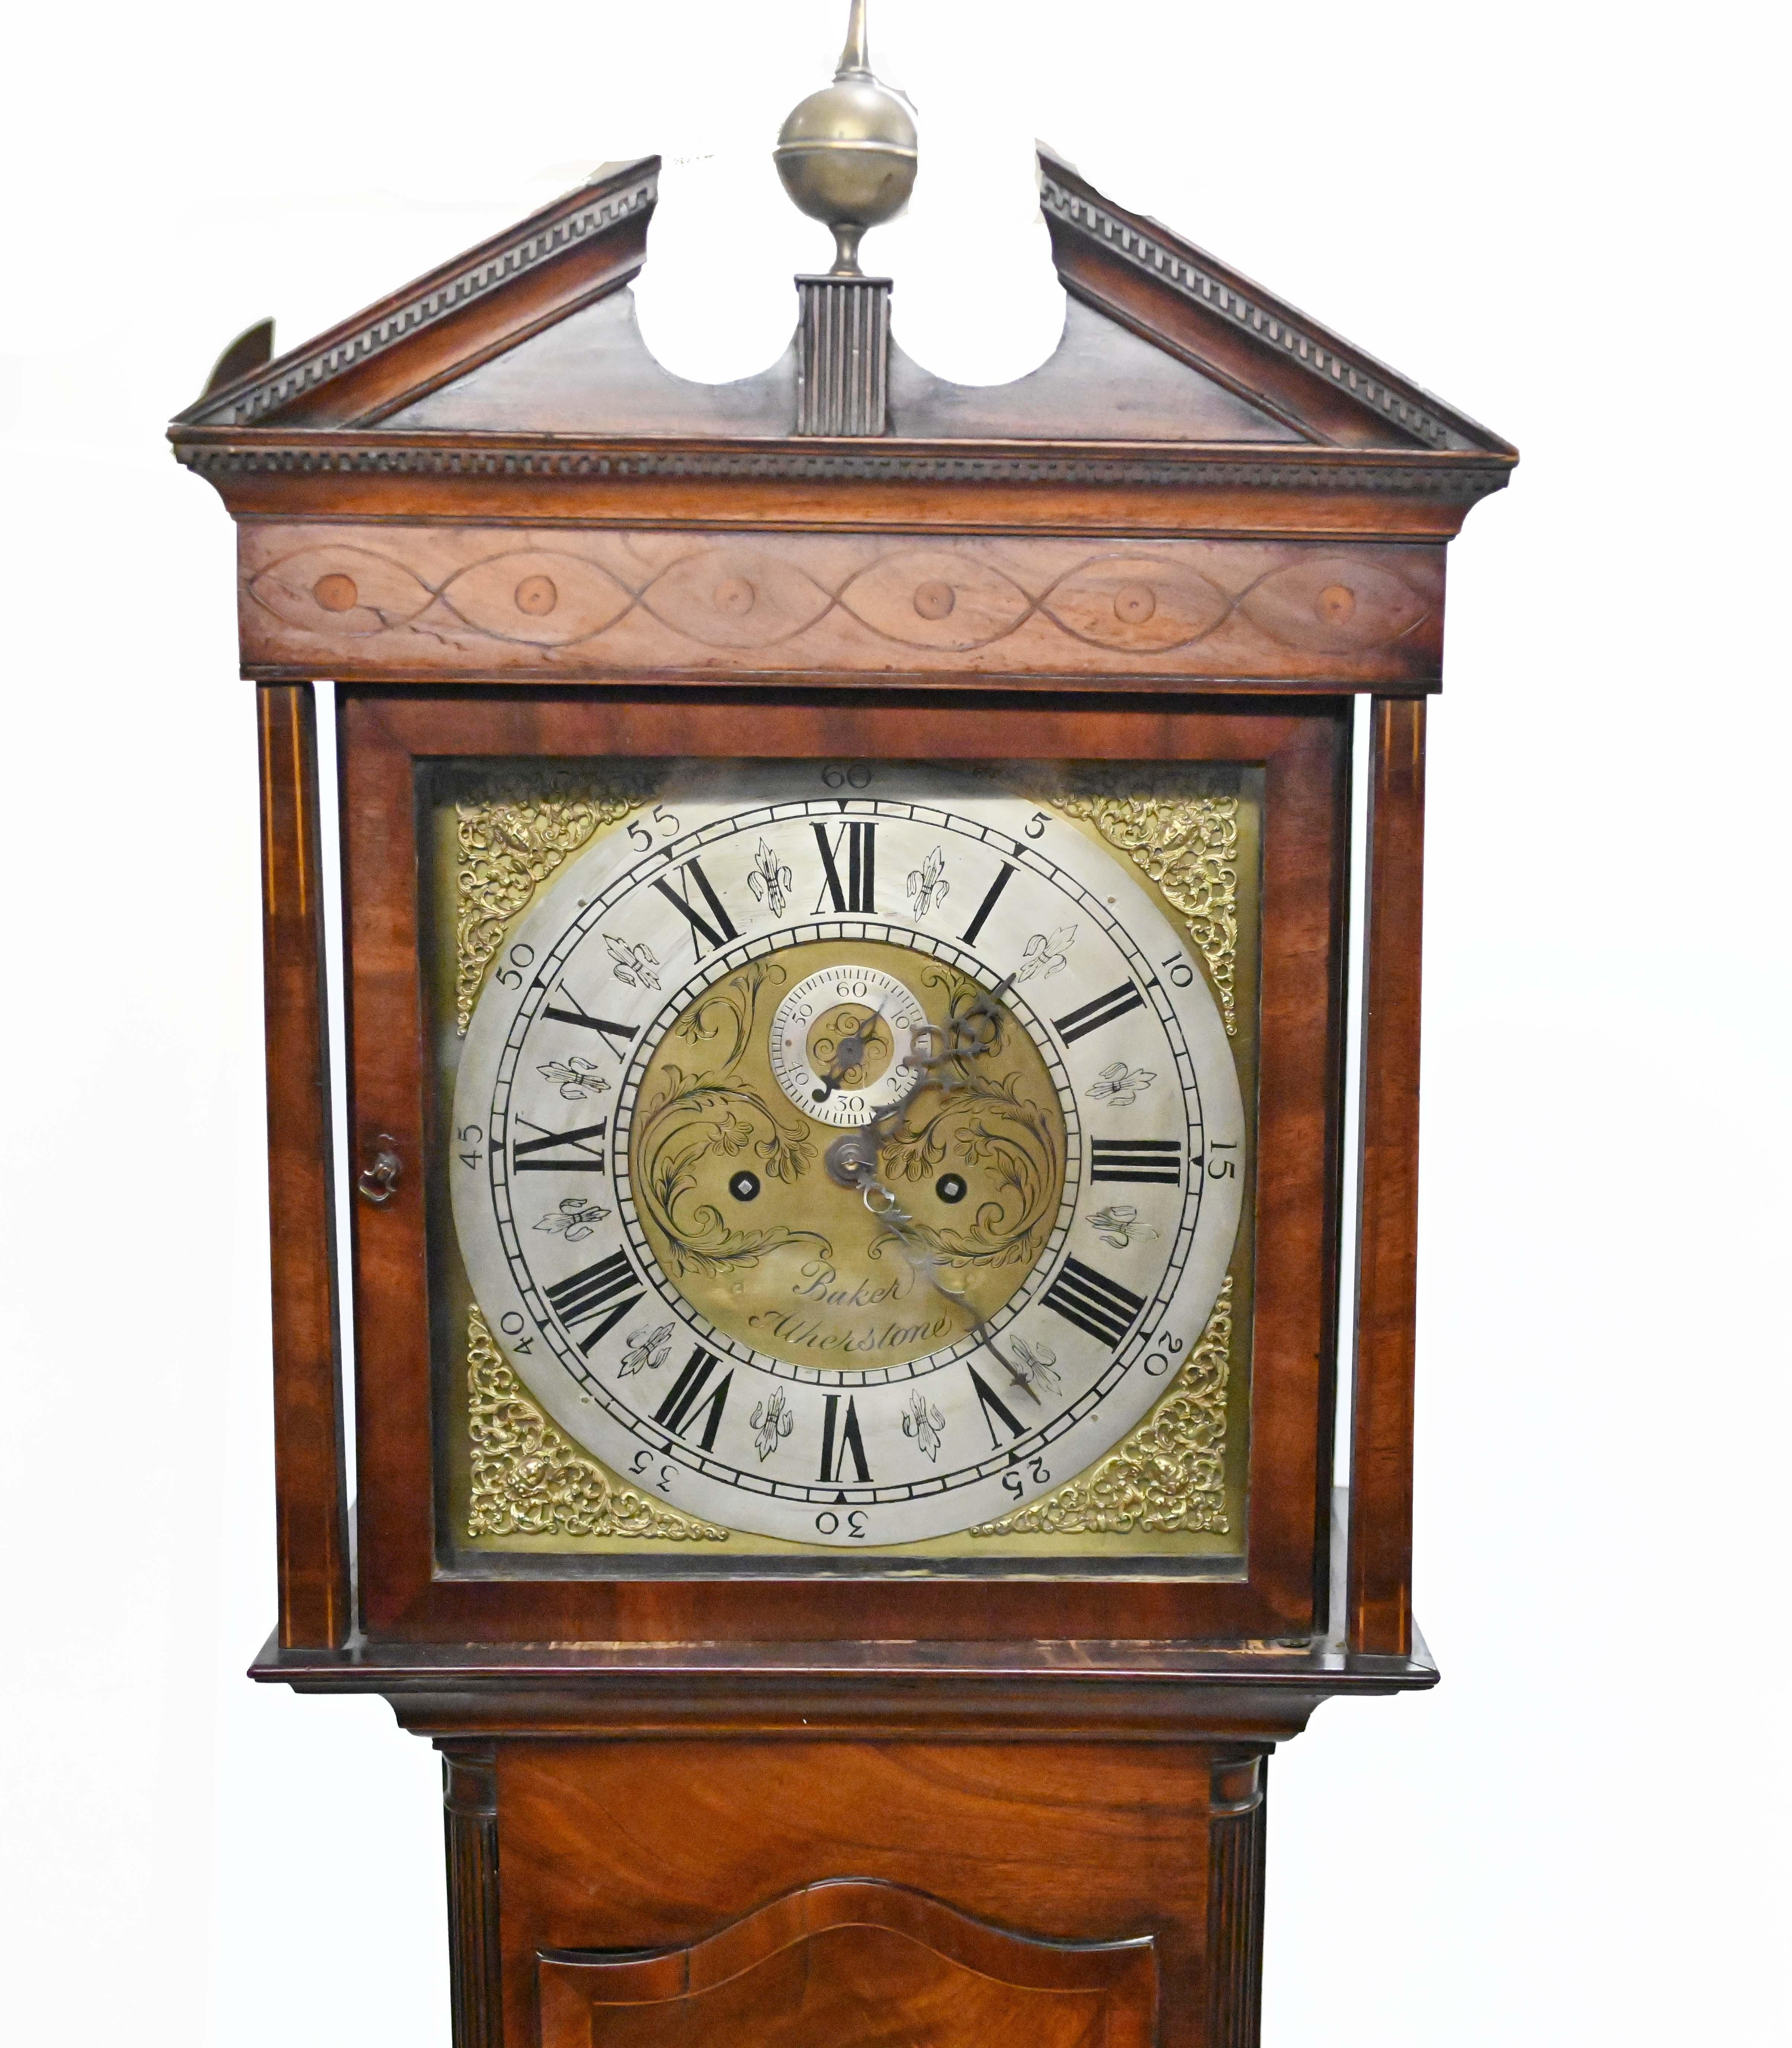 Refined Victorian grandfather clock in mahogany
Brass clock face is inscribed Baker Atherstone who would have been the original makers
In full working order with an arched pediment top
Circva 1840 on this grand time piece
Offered in great condition